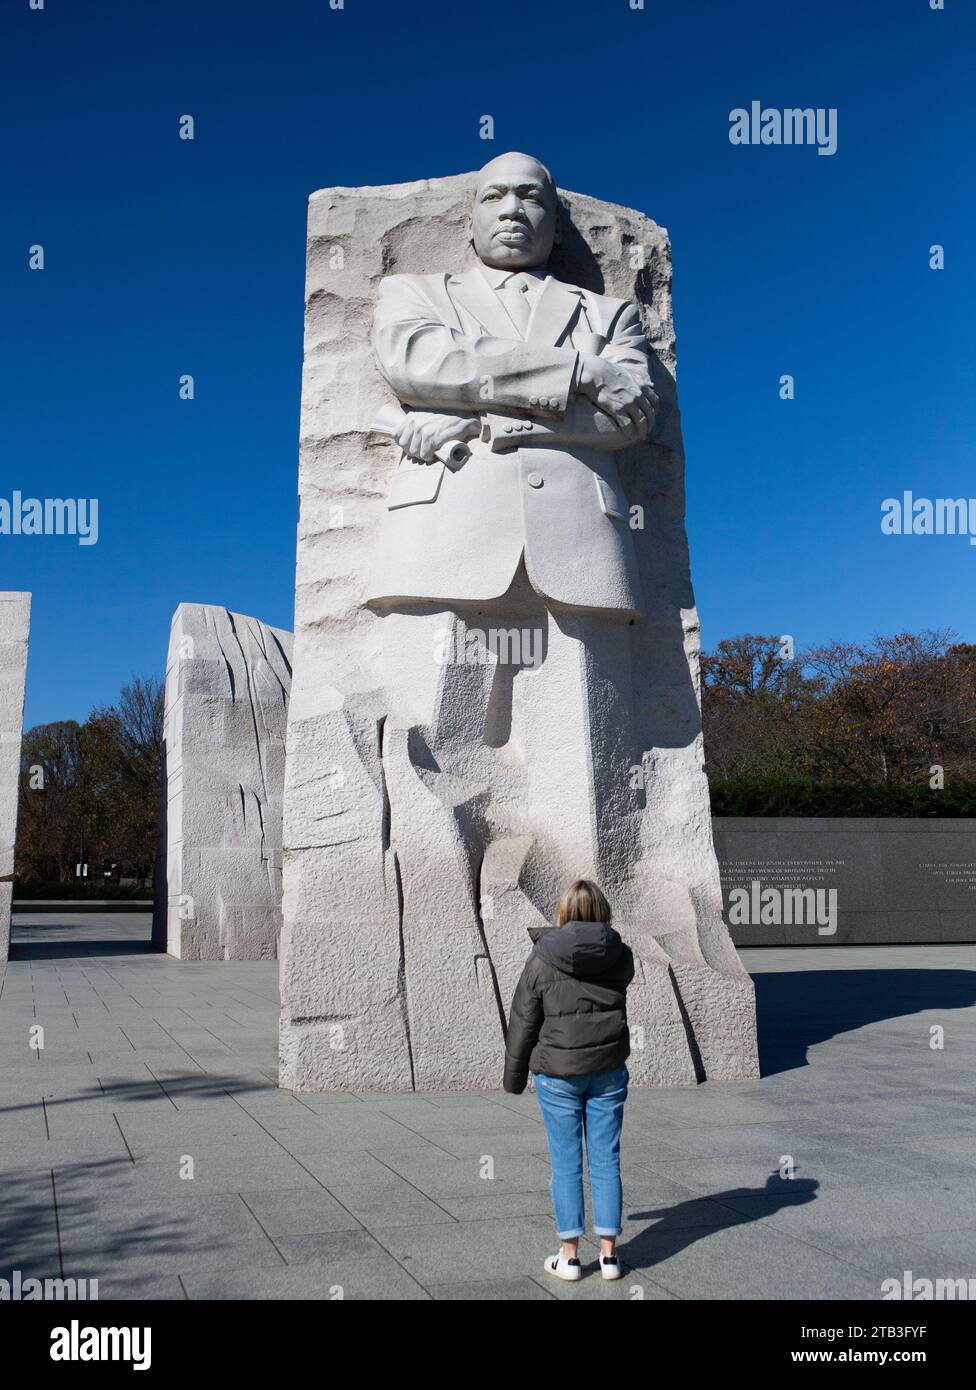 The Martin Luther King, Jr. Memorial is a national memorial located in West Potomac Park next to the National Mall in Washington, D.C. Stock Photo